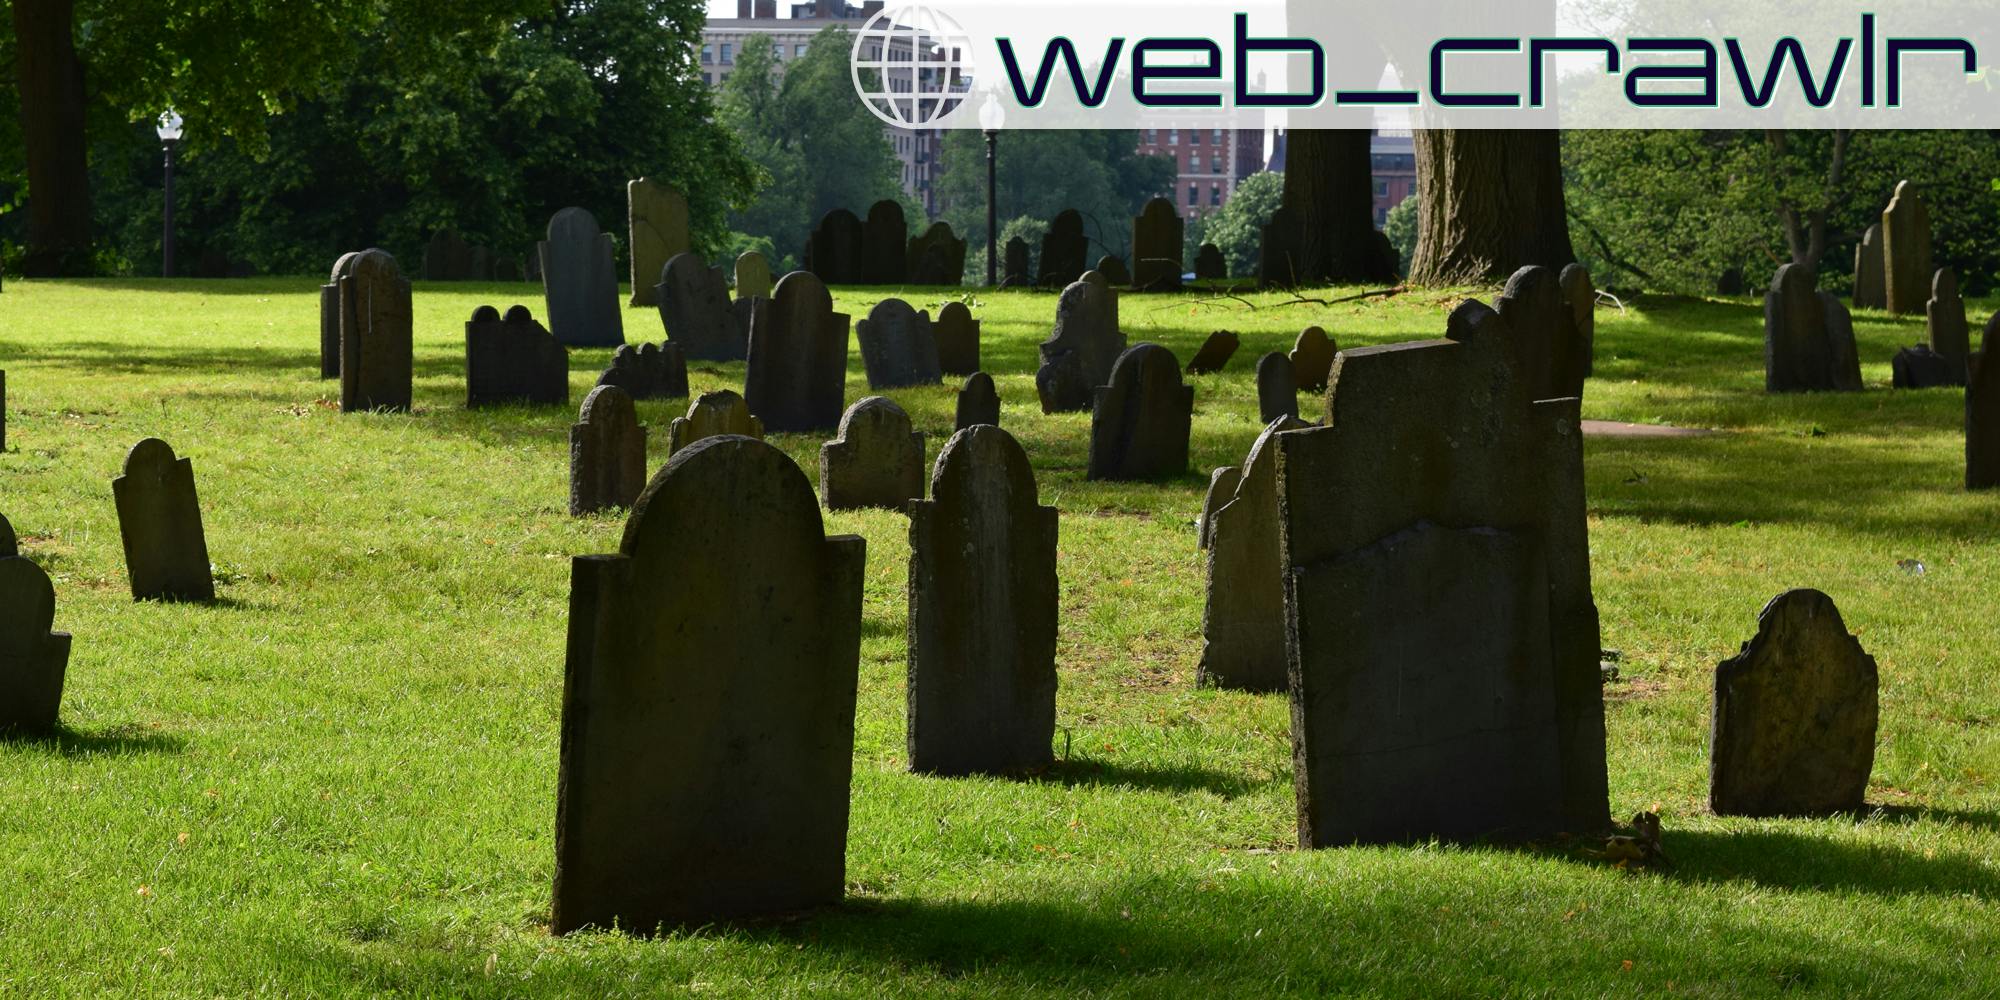 Several grave stones in a graveyard. The Daily Dot newsletter web_crawlr logo is in the top right corner.